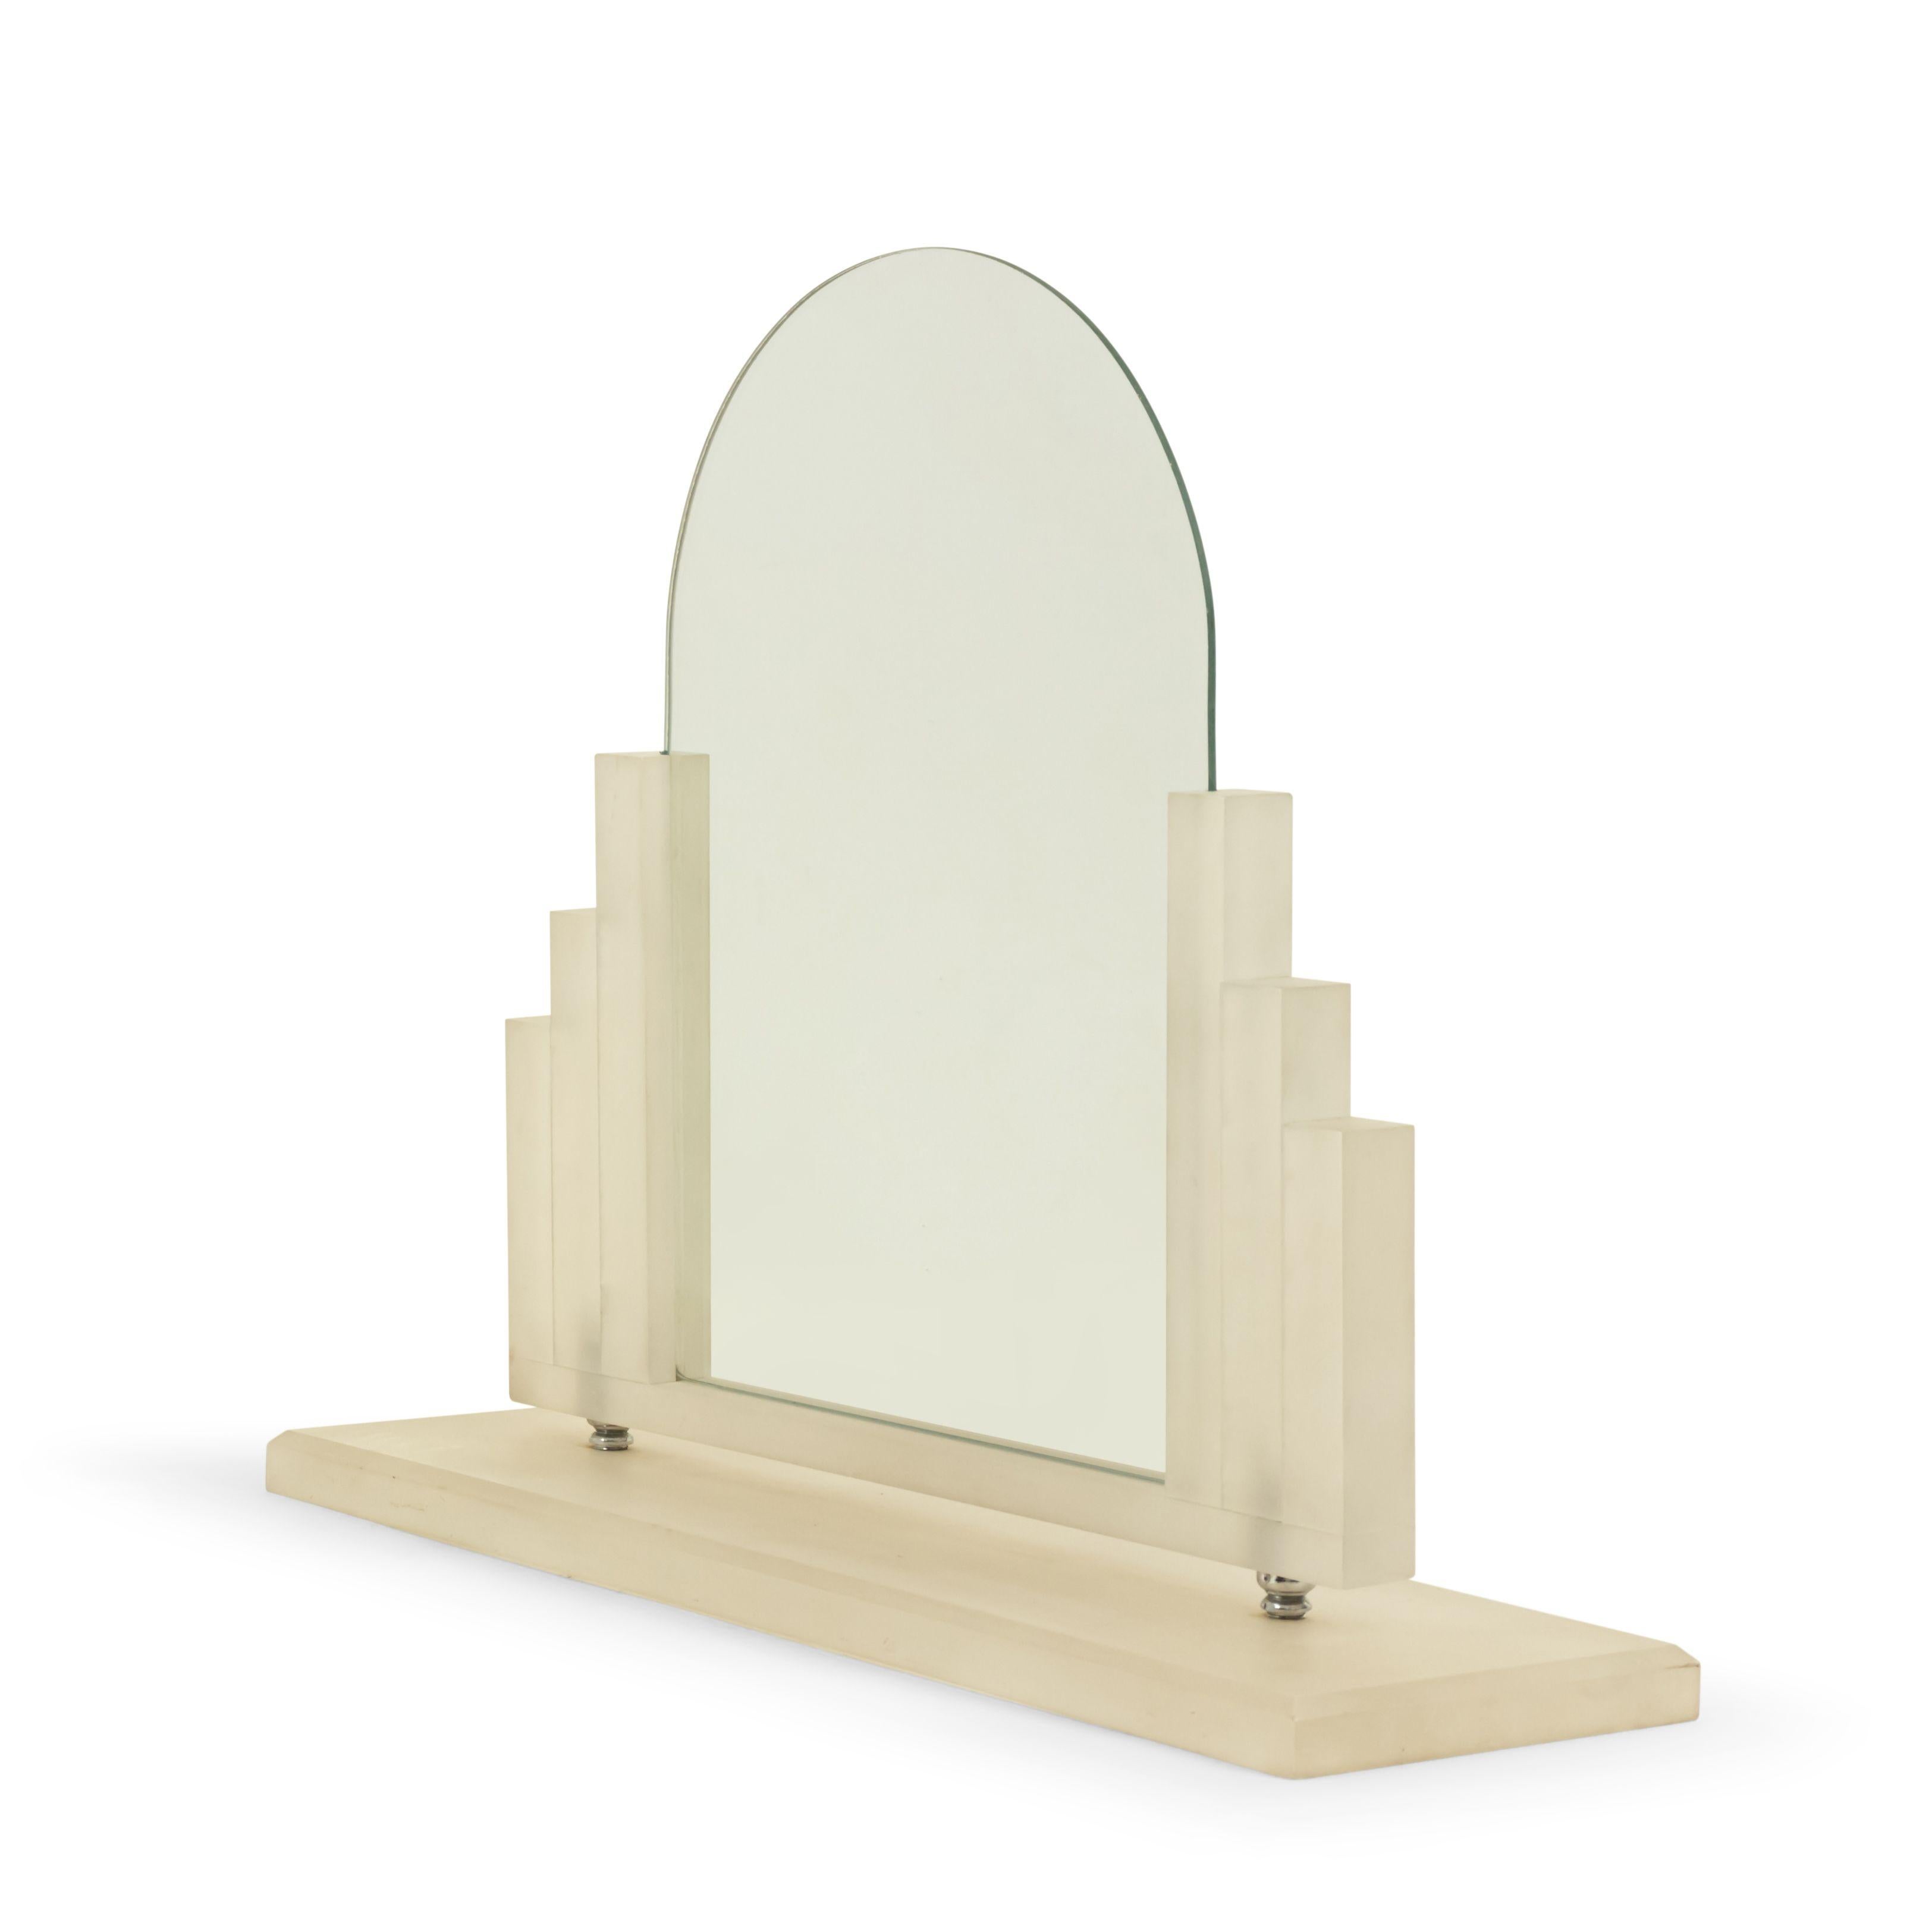 American Art Deco style frosted lucite dressing table / vanity mirror with tiered sides supporting an arch top mirror.
 